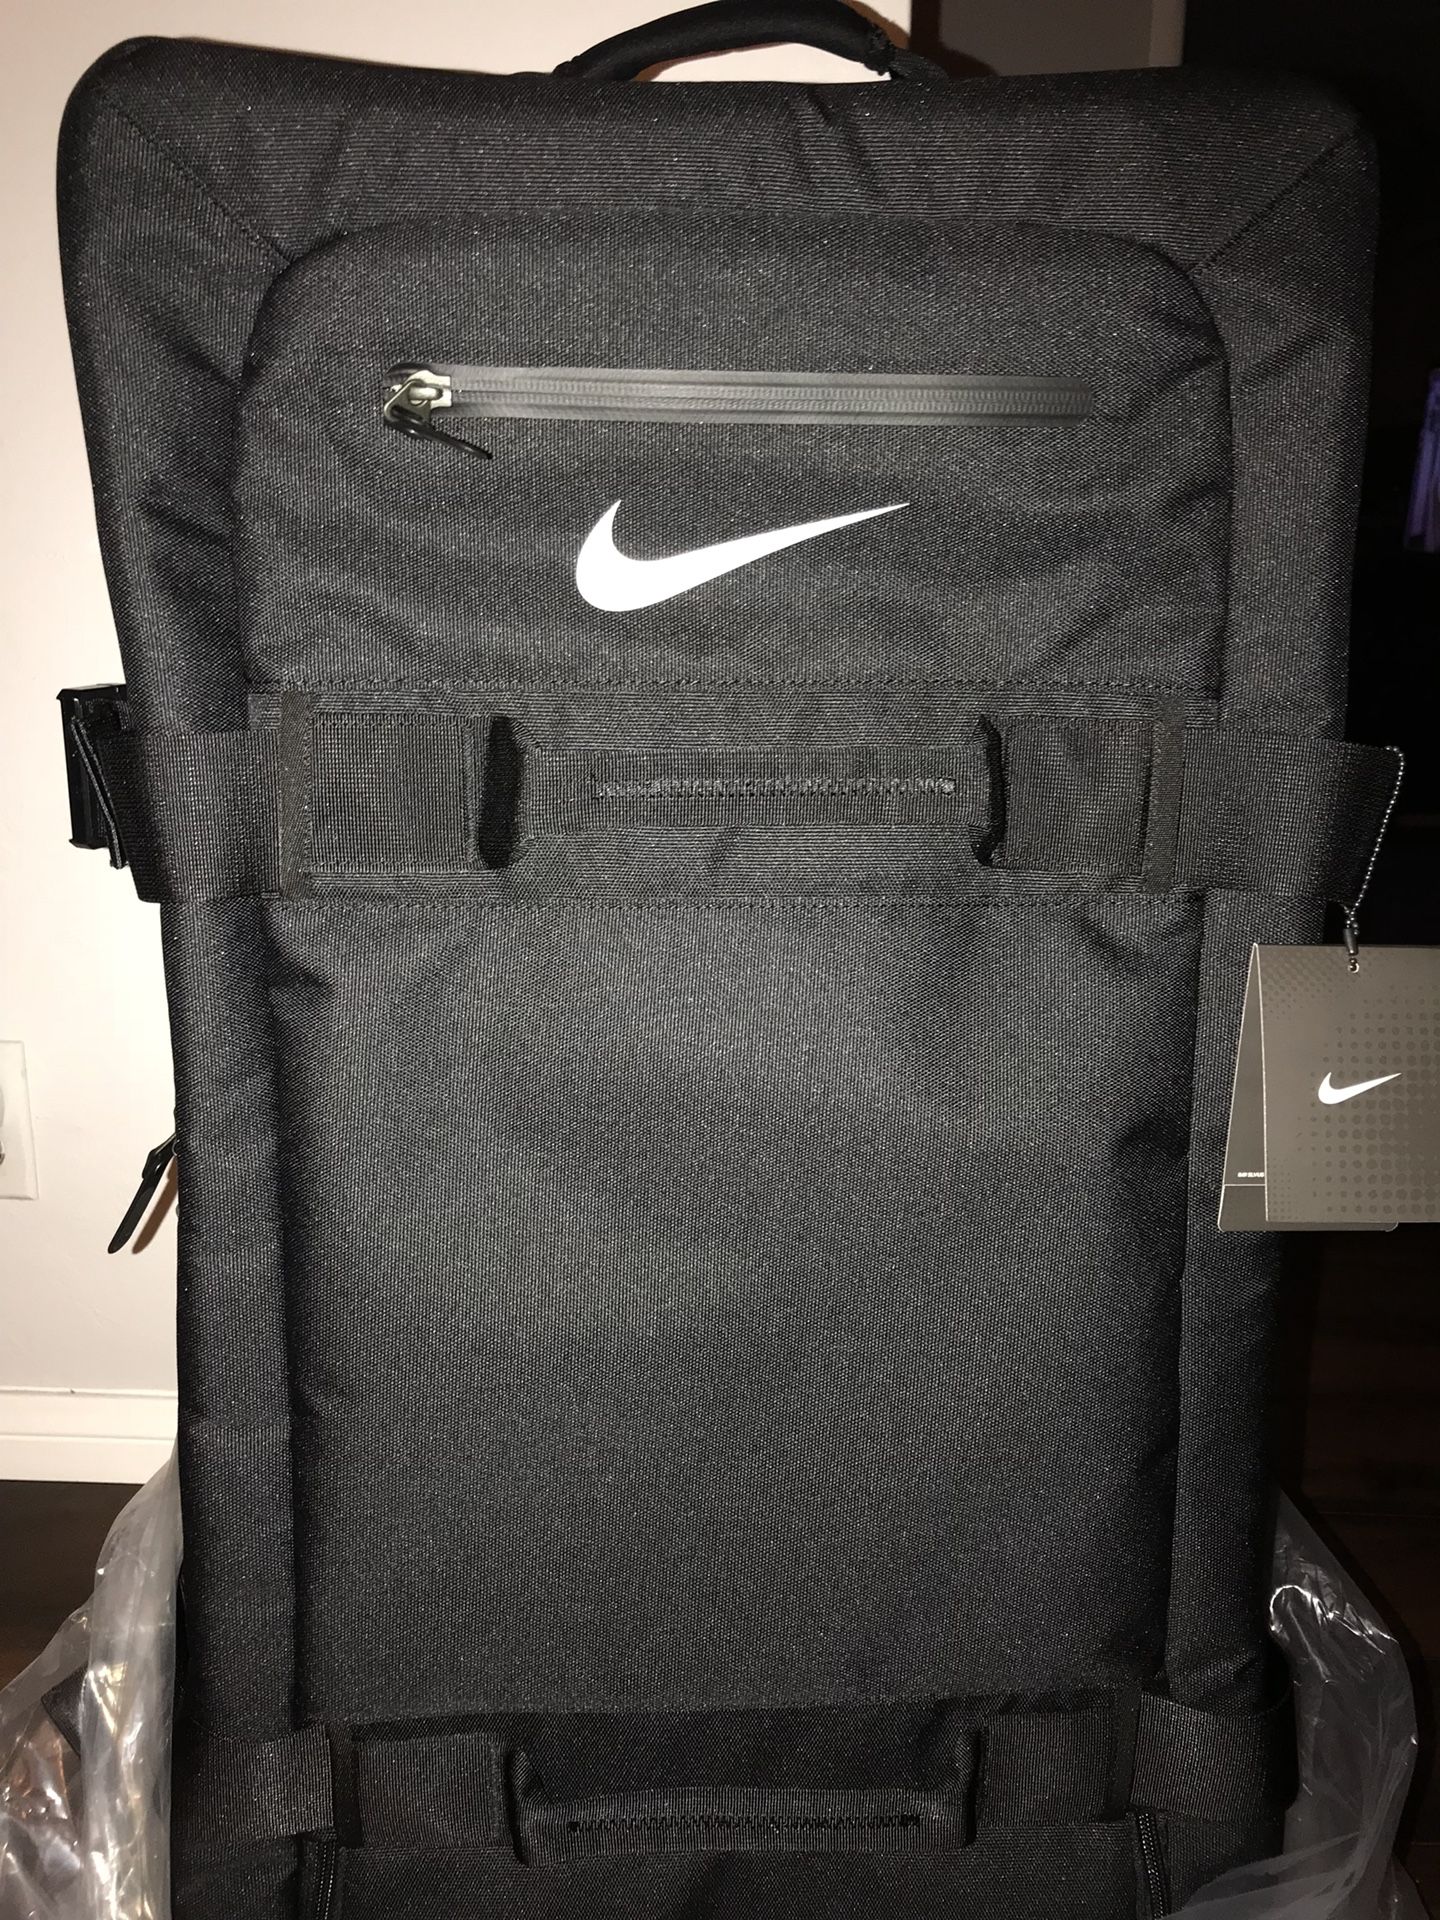 Nike “fiftyone49” large roller suitcase Sale in Beach, CA - OfferUp